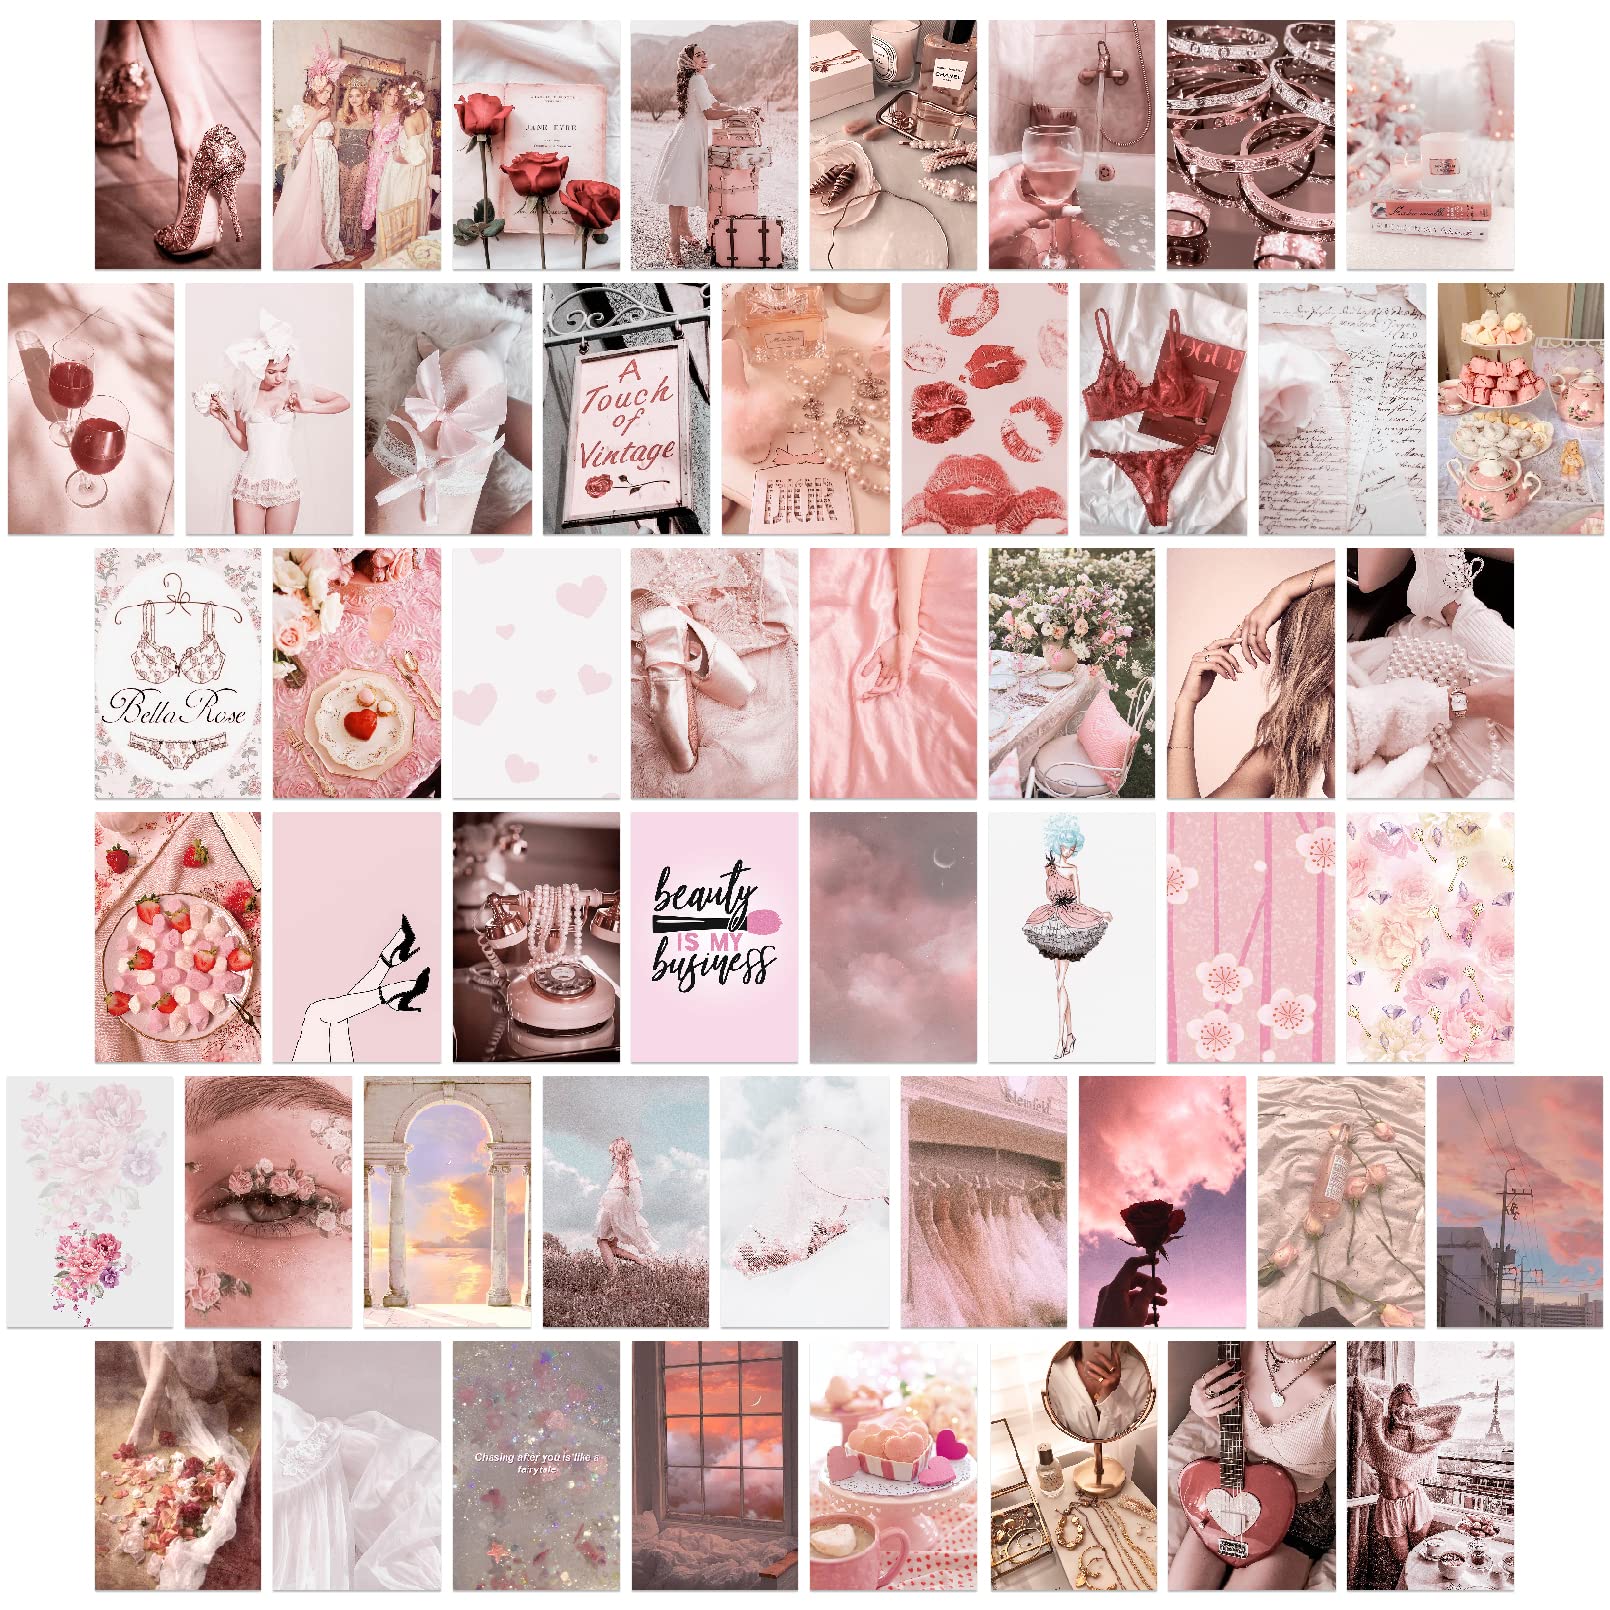 LOVEDMORE Coquette Room Decor for Aesthetic Wall Collage Kit, 50 PCS 4x6 inch, Pink Aesthetic Room Decor for Teen Boys Girls, Vintage Wall Art Prints for Dorm, Coquette Posters for Bedroom